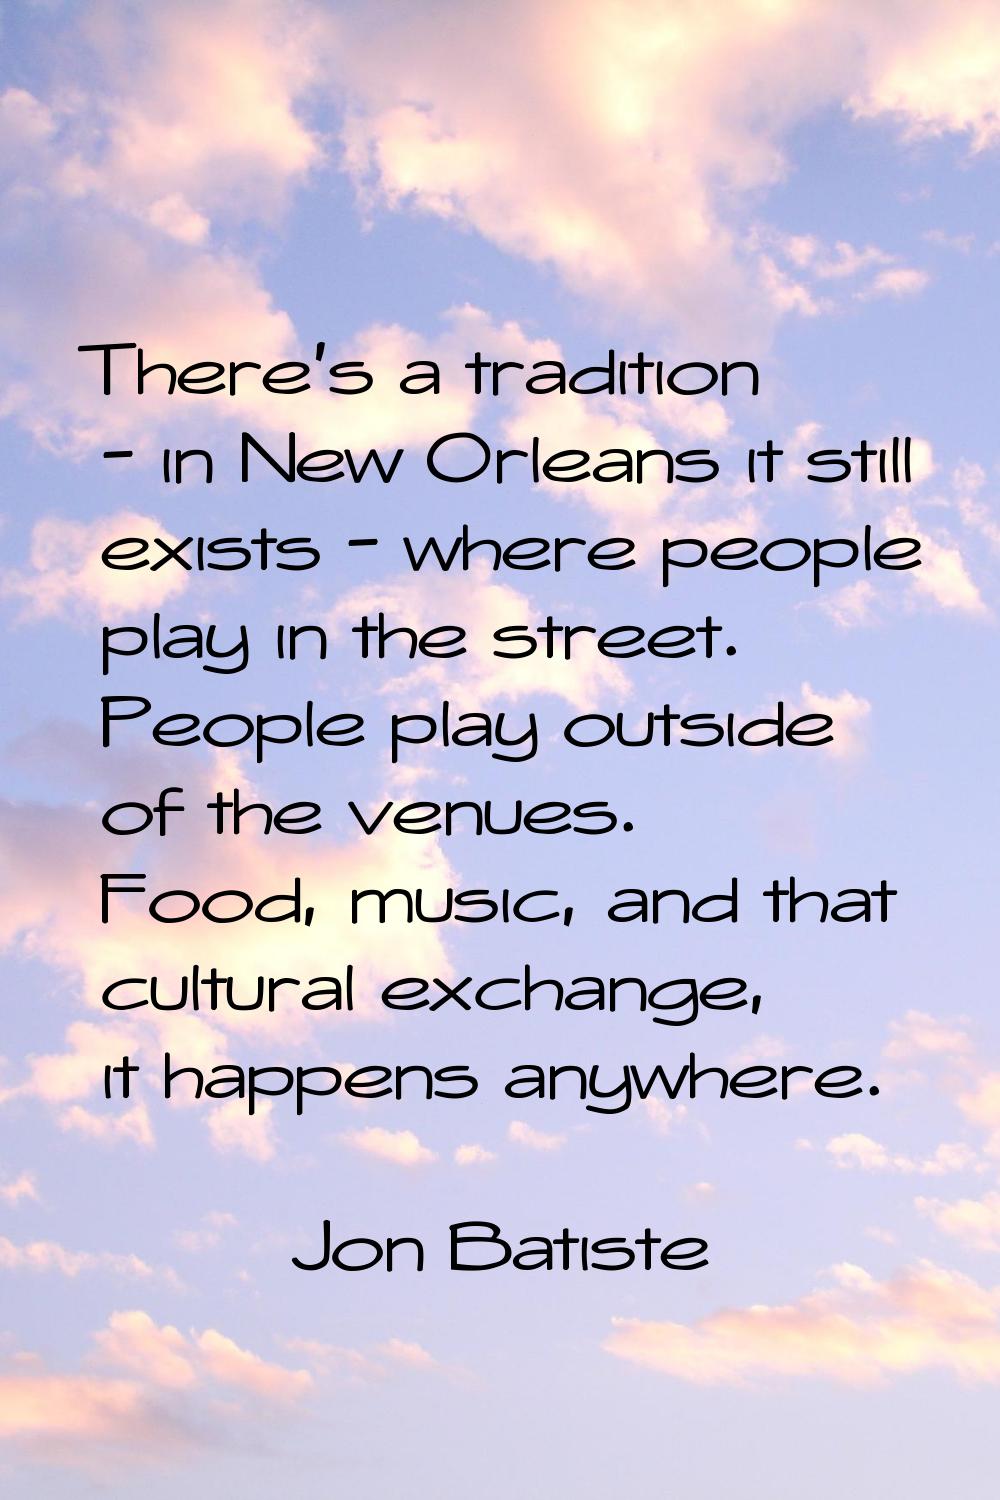 There's a tradition - in New Orleans it still exists - where people play in the street. People play